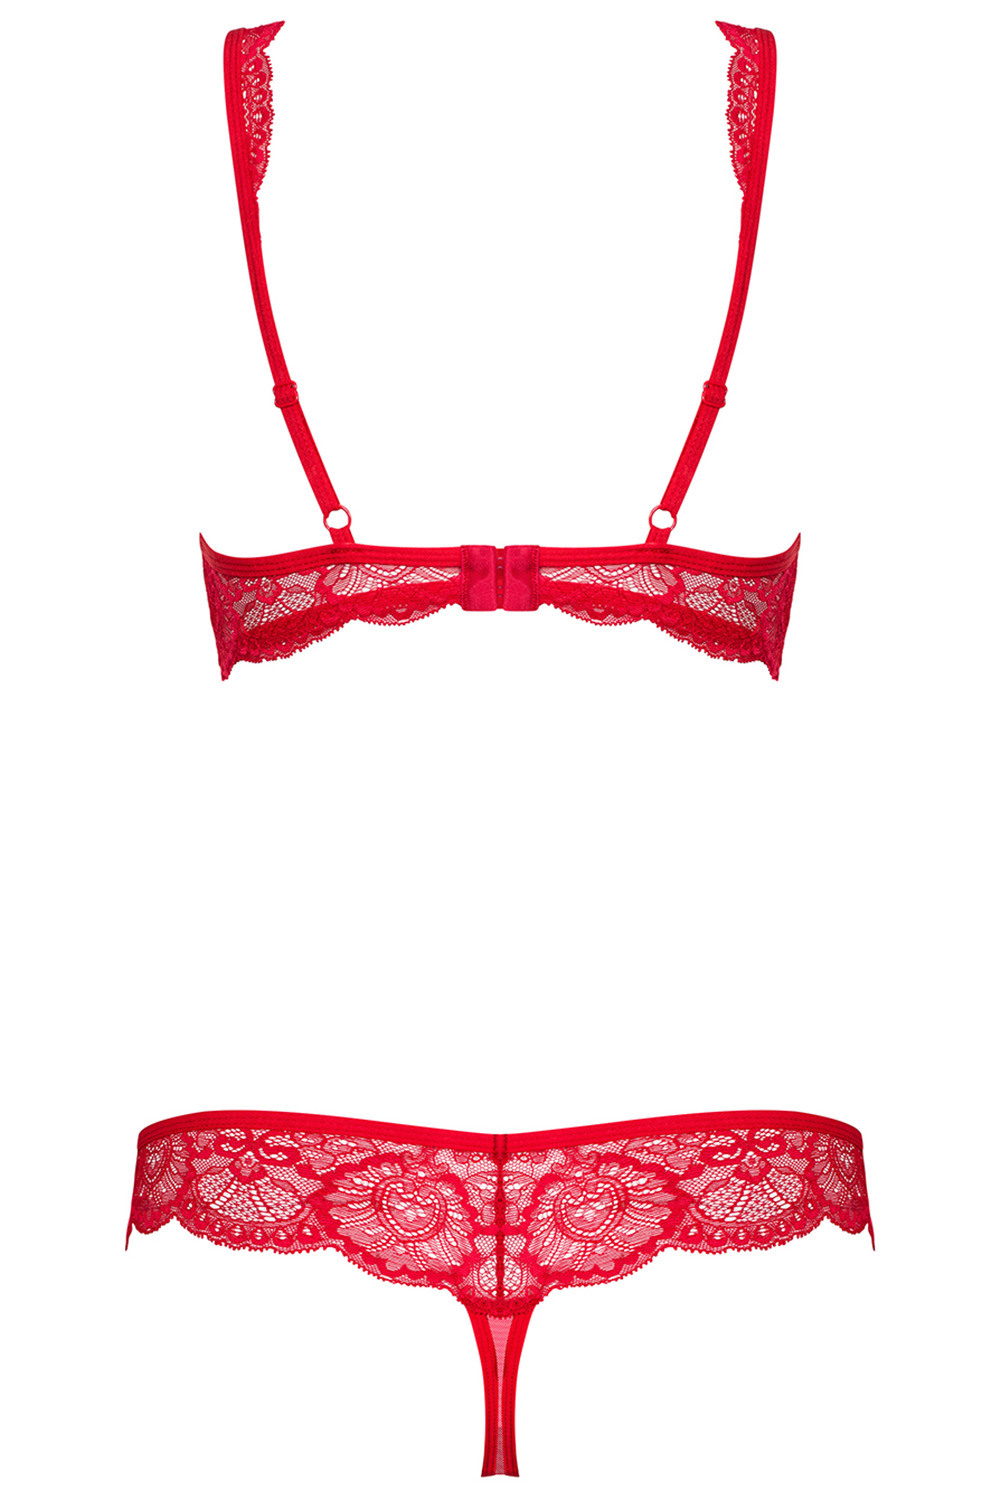 Obsessive women's sexy lace bra and thong set 853-SET-3 | Red